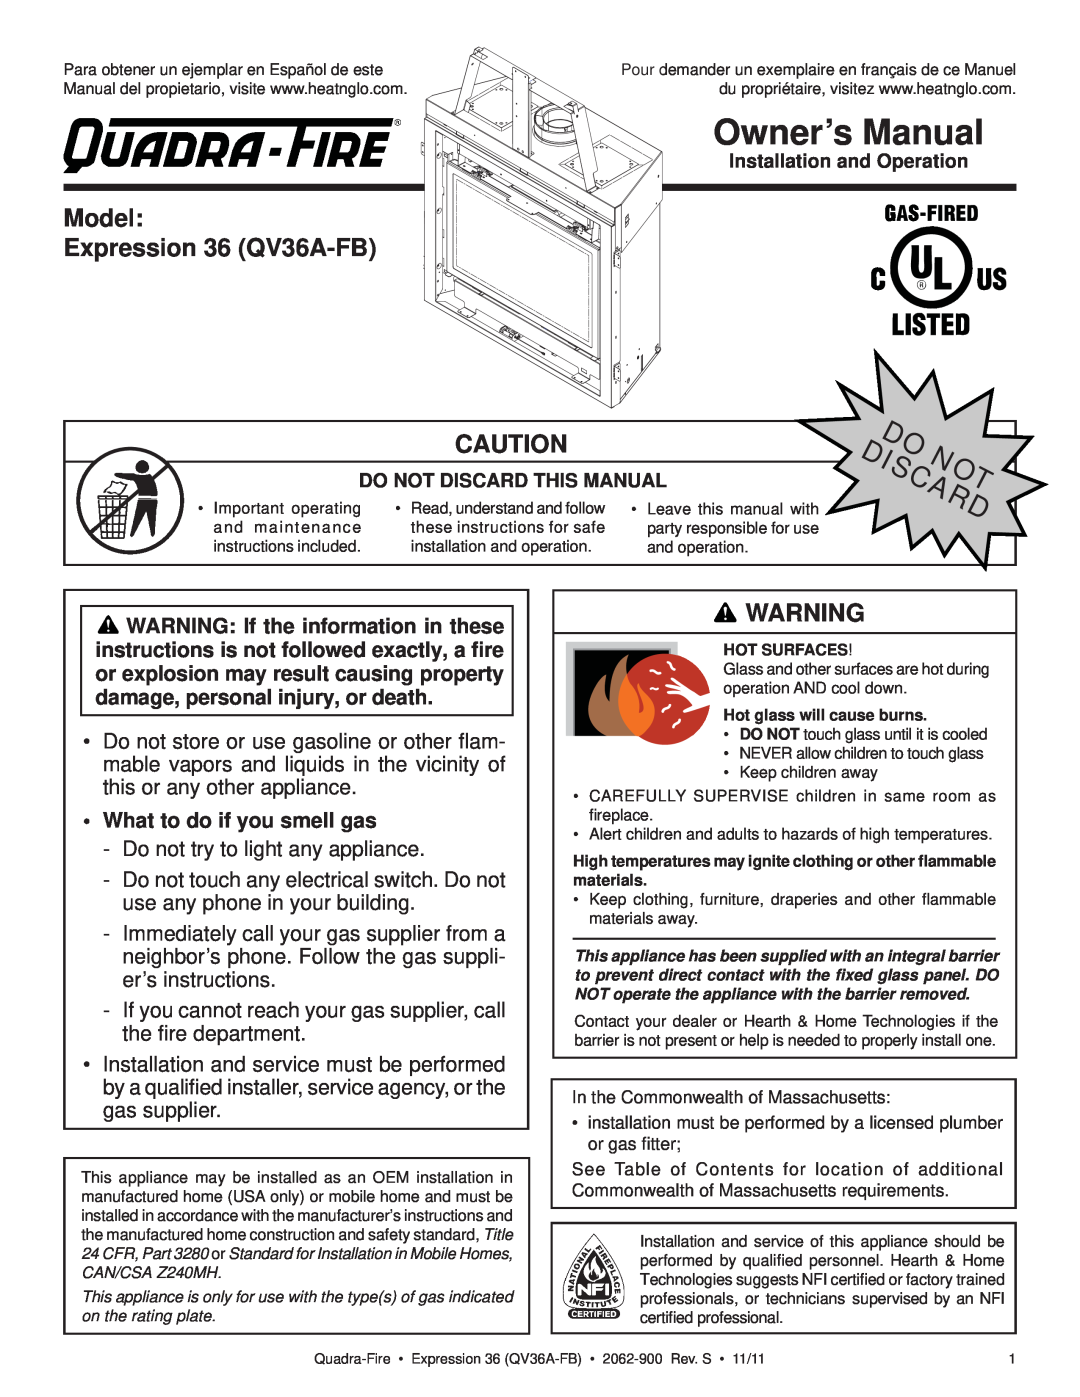 Quadra-Fire owner manual Model Expression 36 QV36A-FB, •What to do if you smell gas 